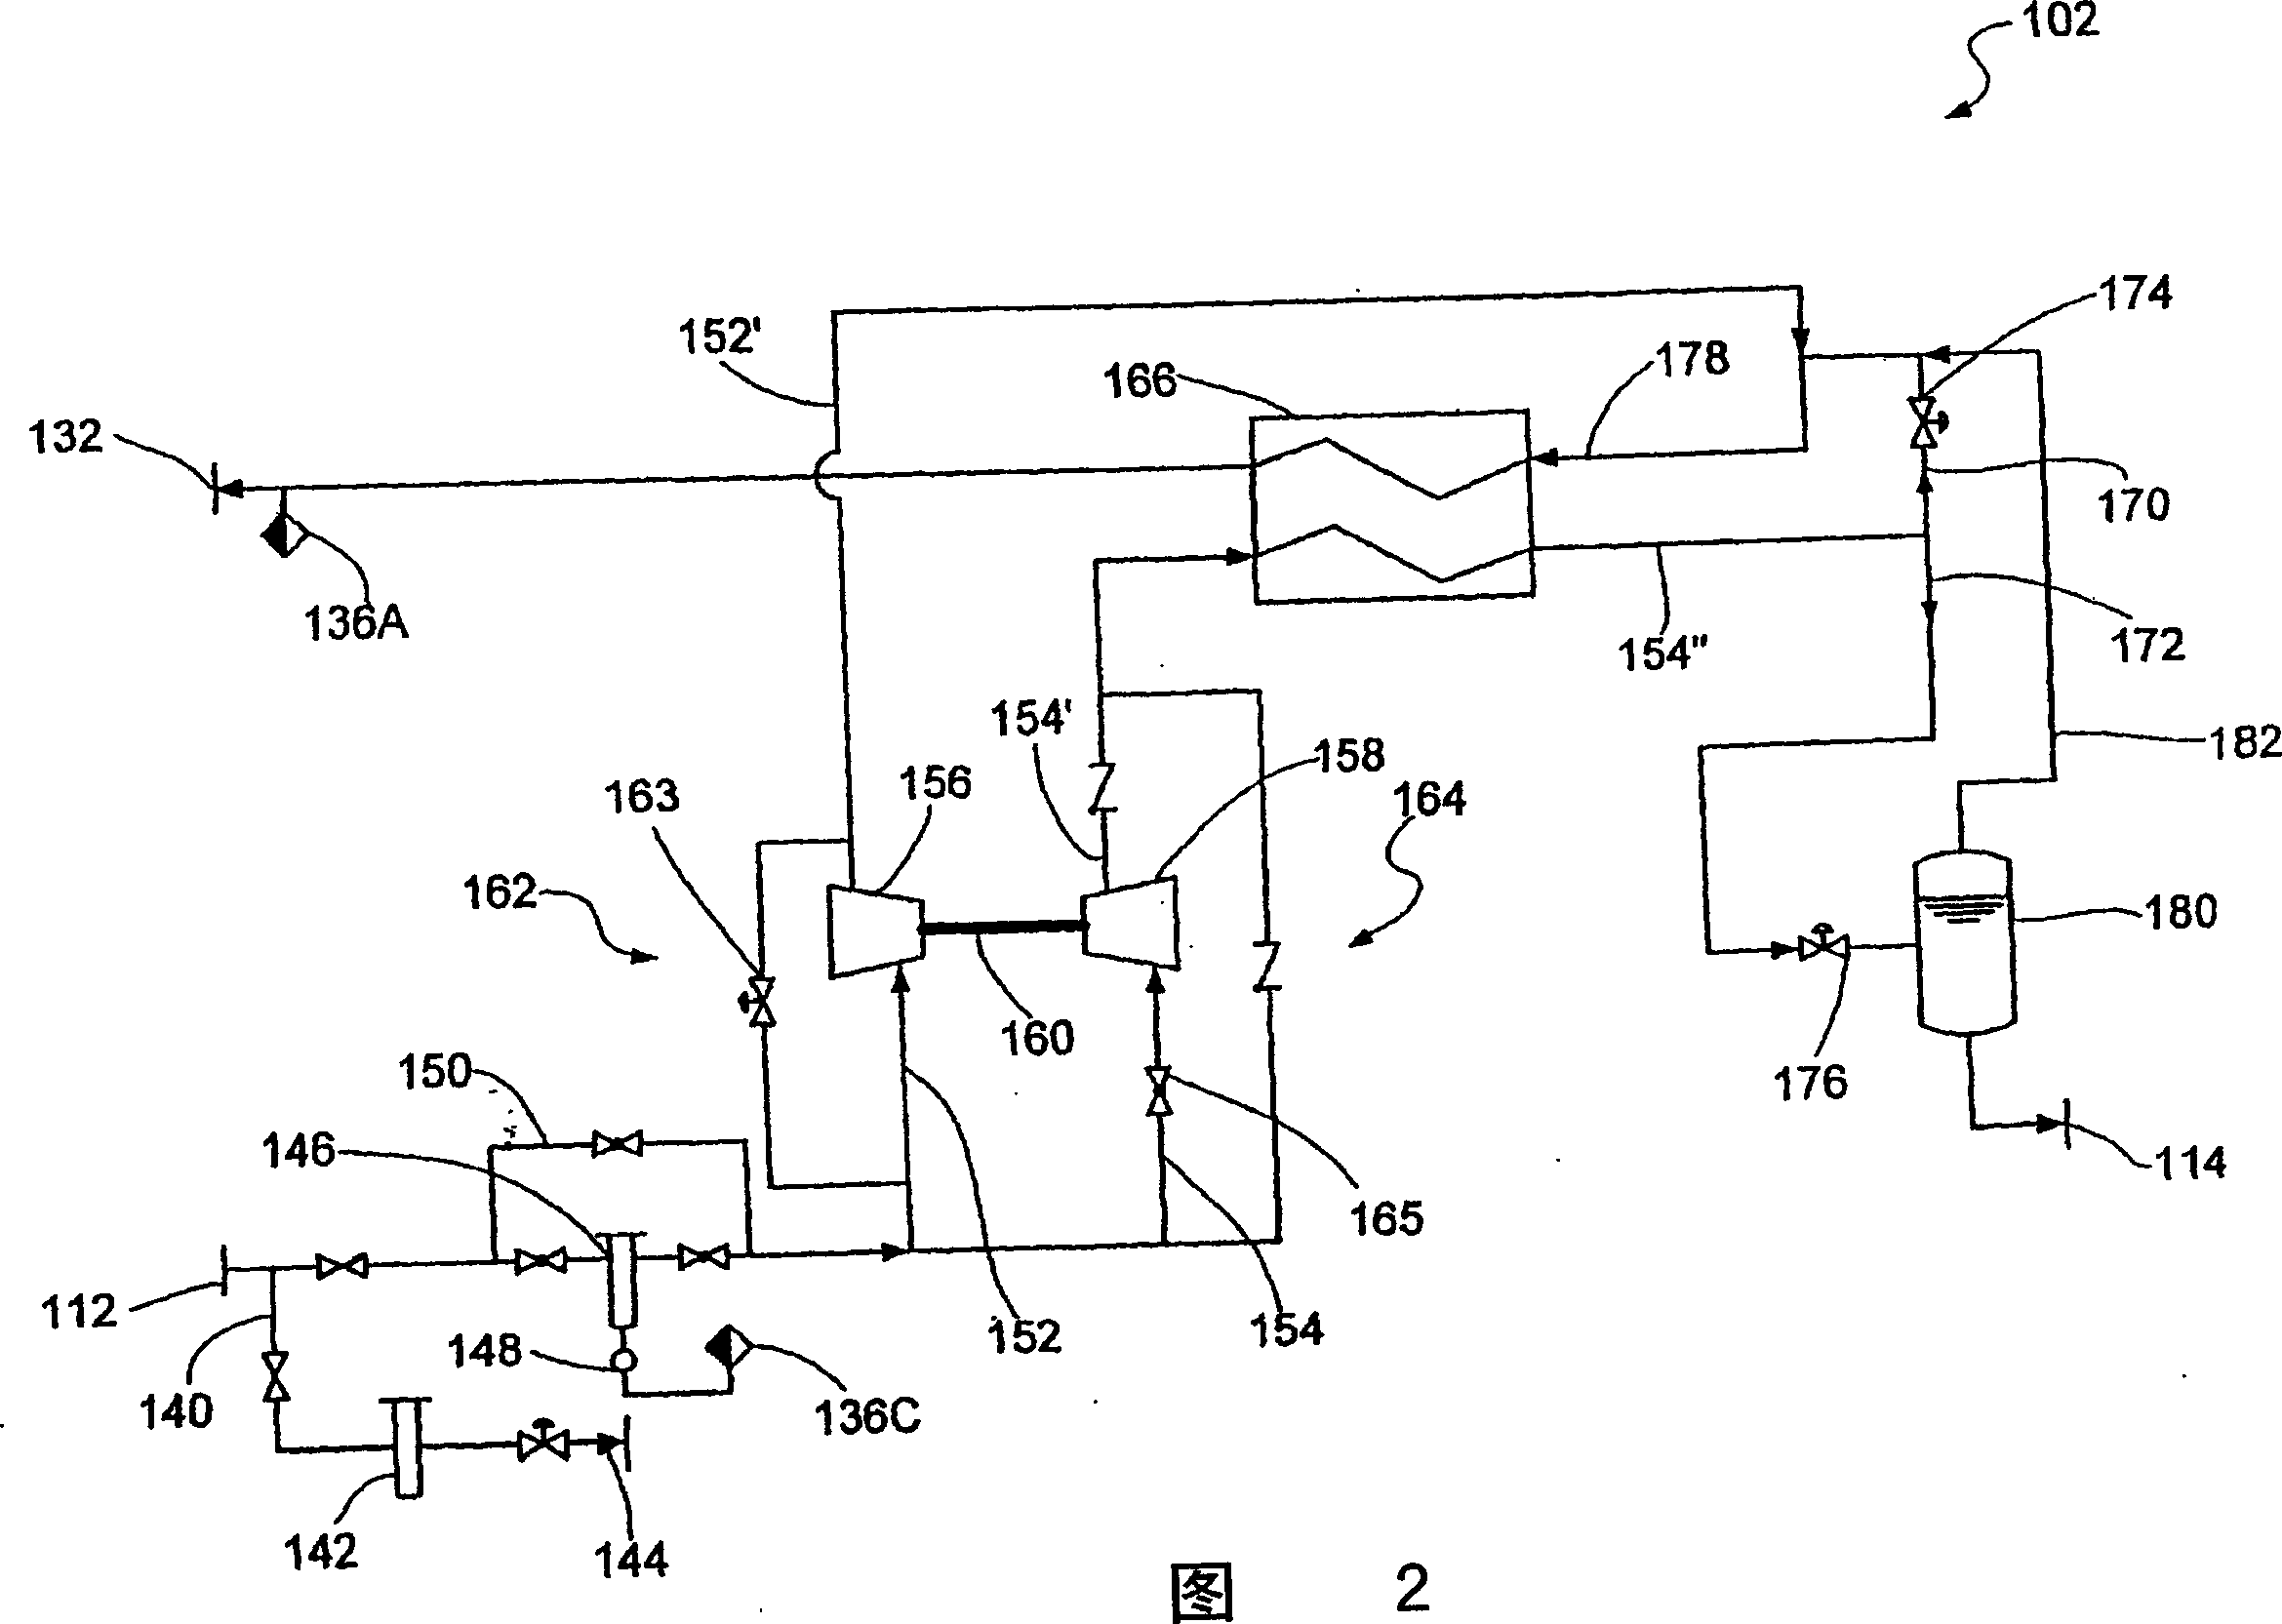 Apparatus for the liquefaction of natural gas and methods relating to same